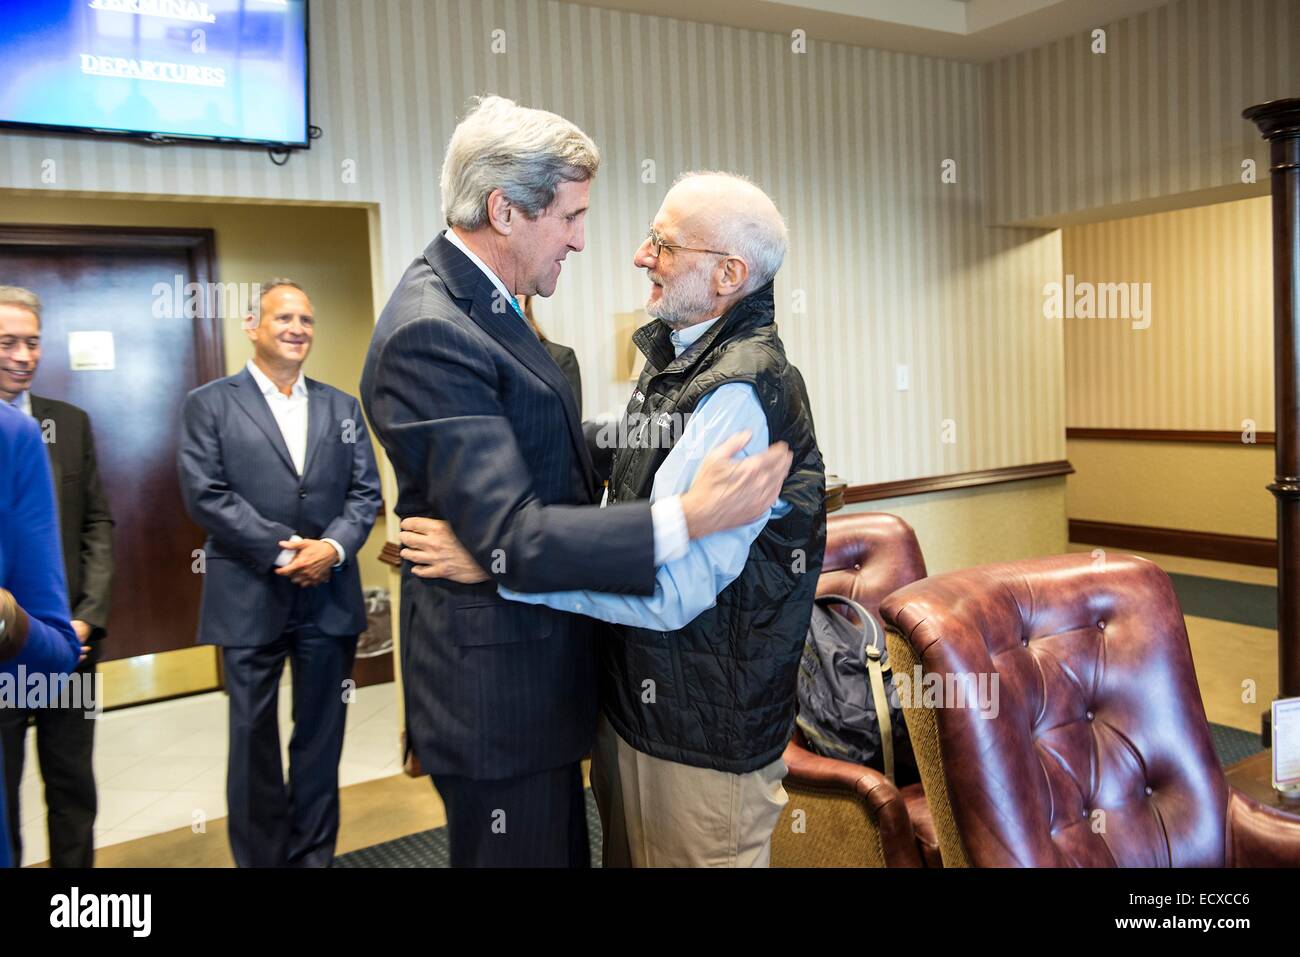 USAID contractor Alan Gross, imprisoned in Cuba for five years, is greeted by Secretary of State John Kerry after a flight back from Cuba following his release December 17, 2014 at Andrews Air Force Base in Maryland. Stock Photo